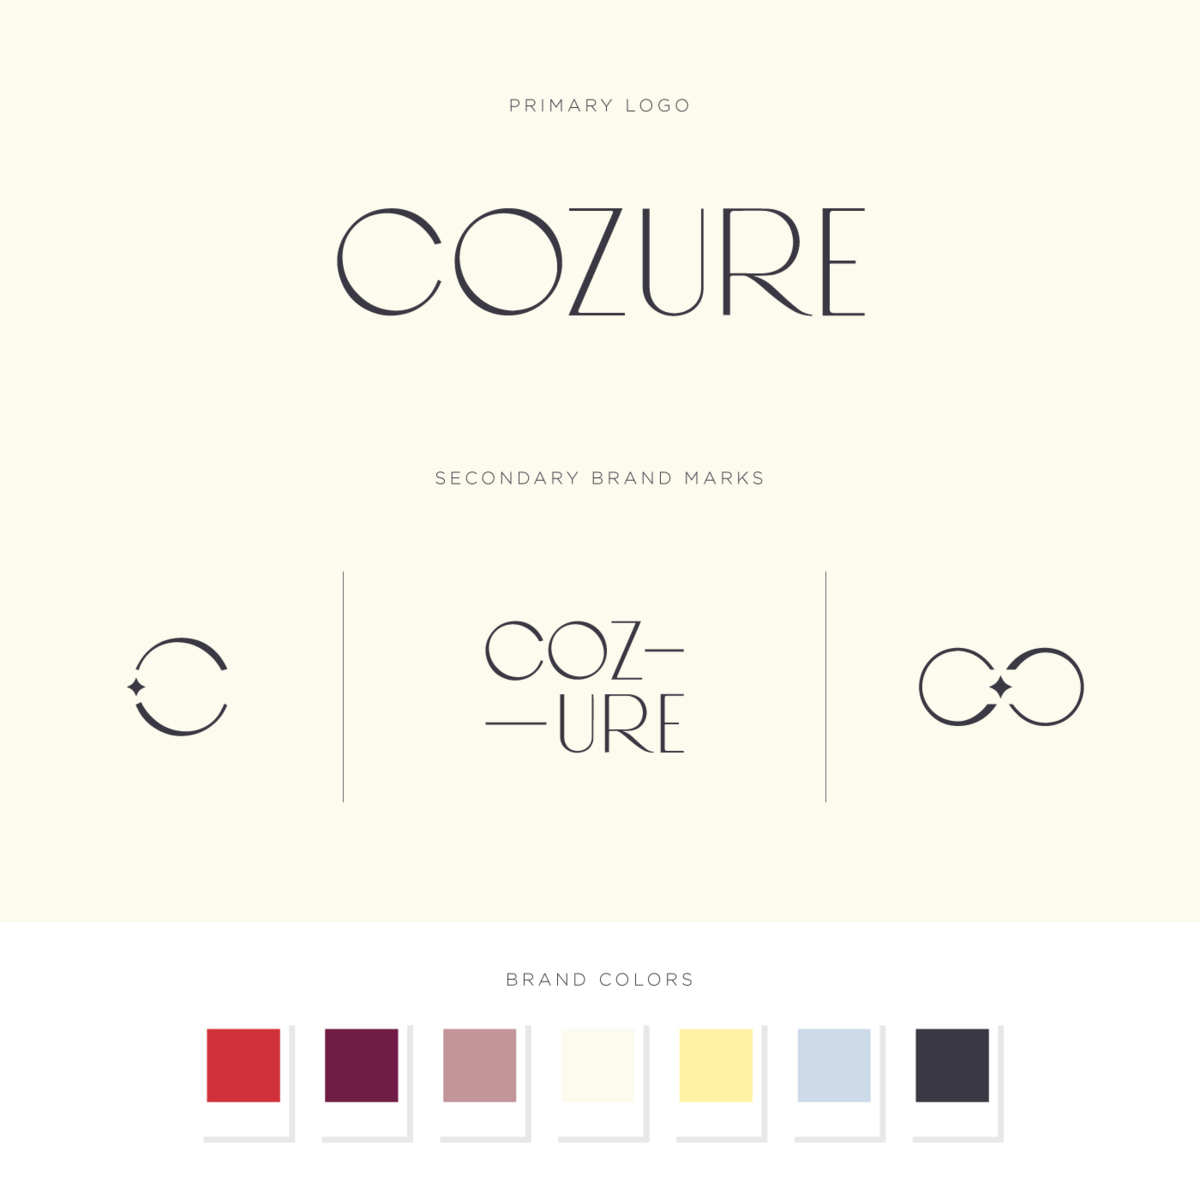 Cozure logos and brand colors